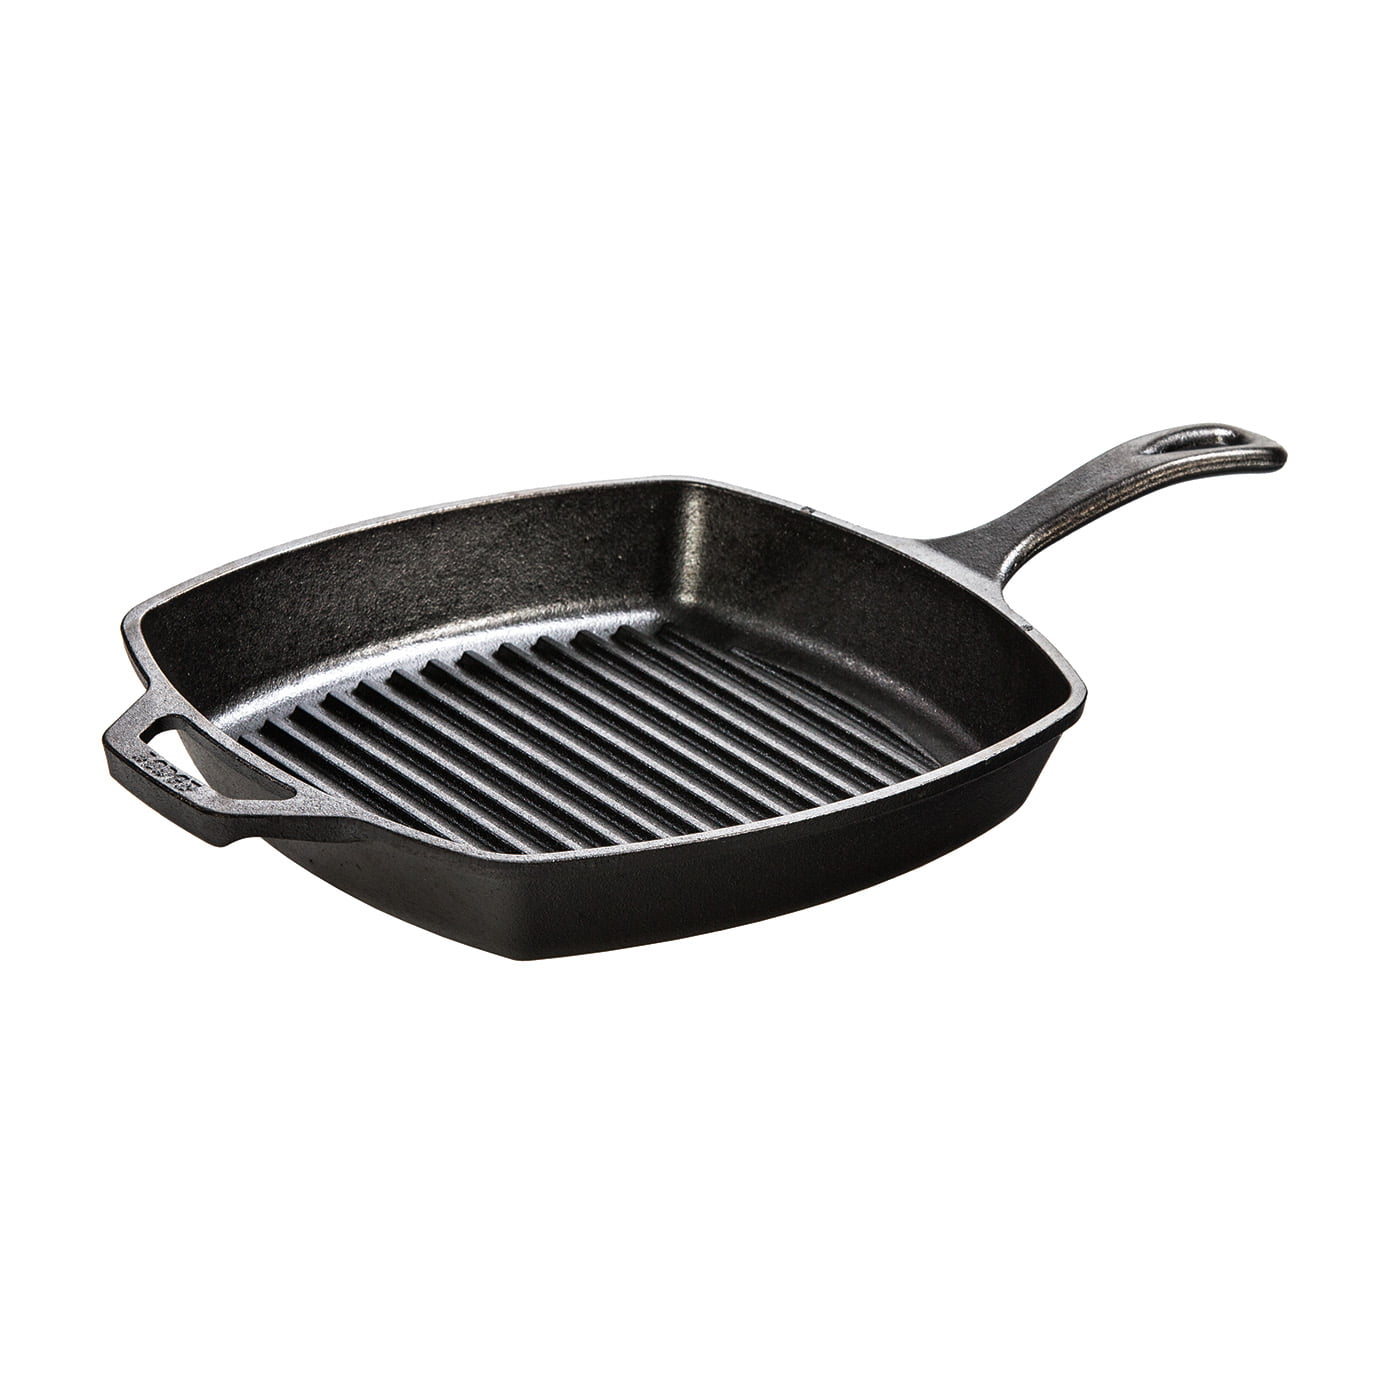 Pre-Seasoned Cast Iron Skillet Frying Pan Griddle BBQ Grill Plate Pan Roast Tray 